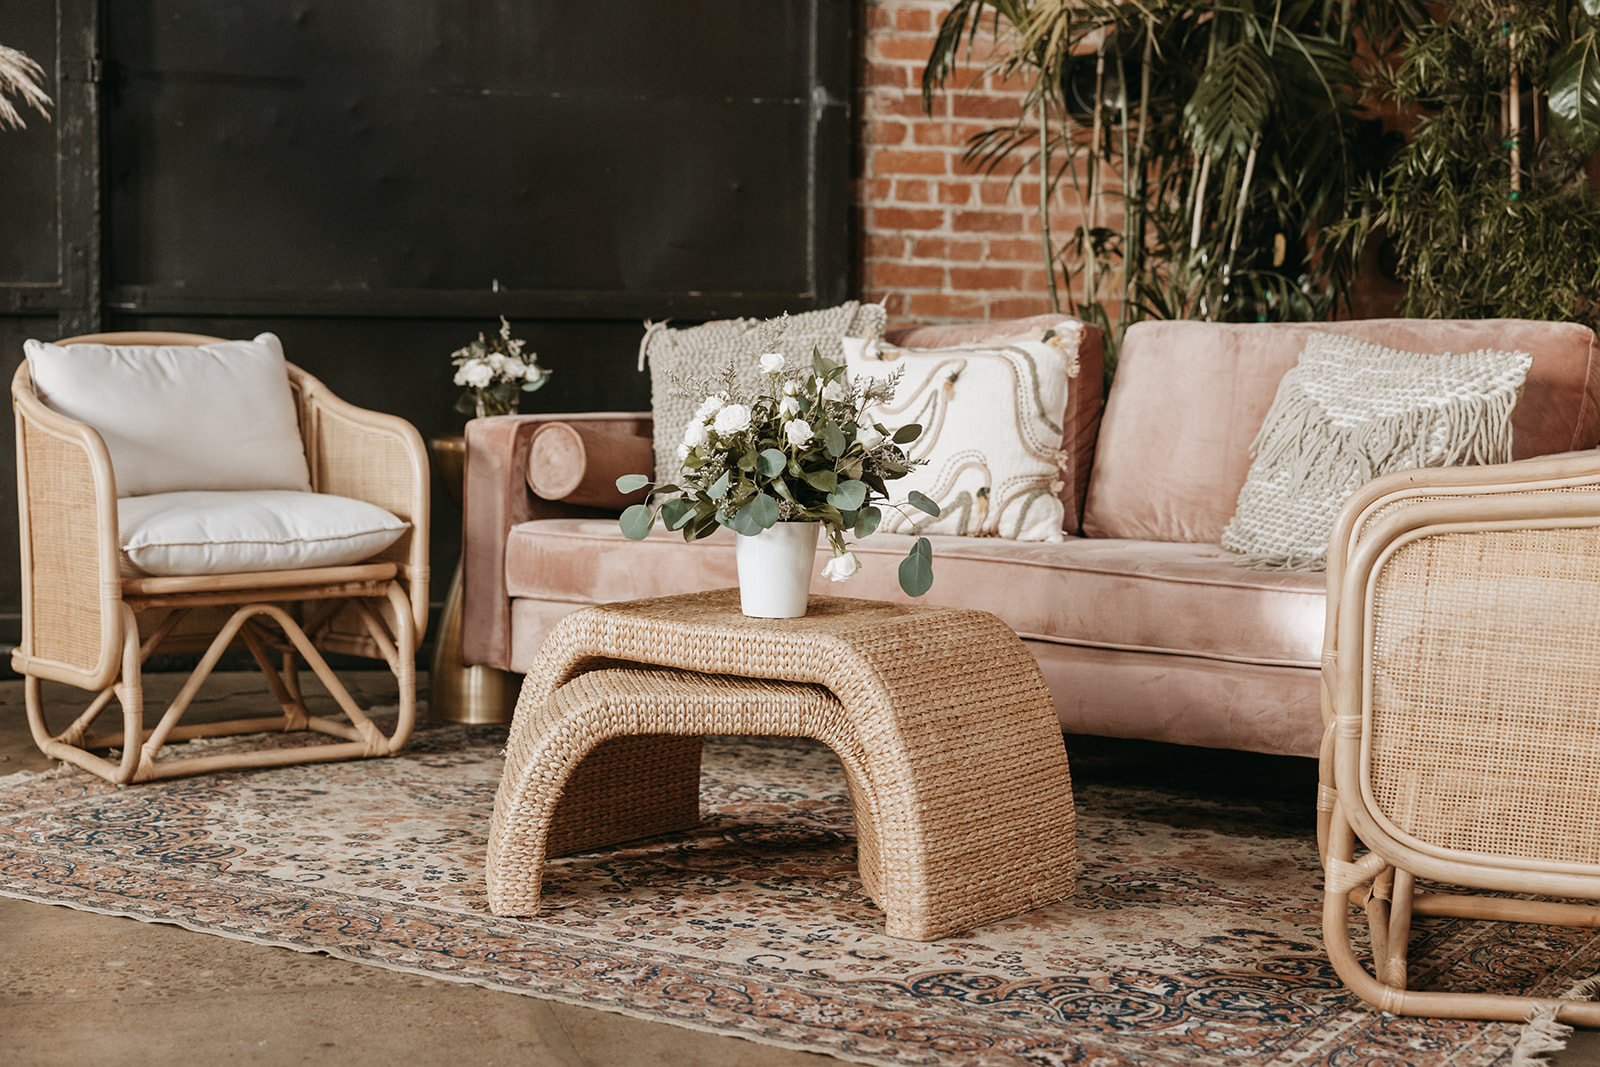 wedding details for a lounge area | The Penny: A Downtown Wedding Venue in San Luis Obispo